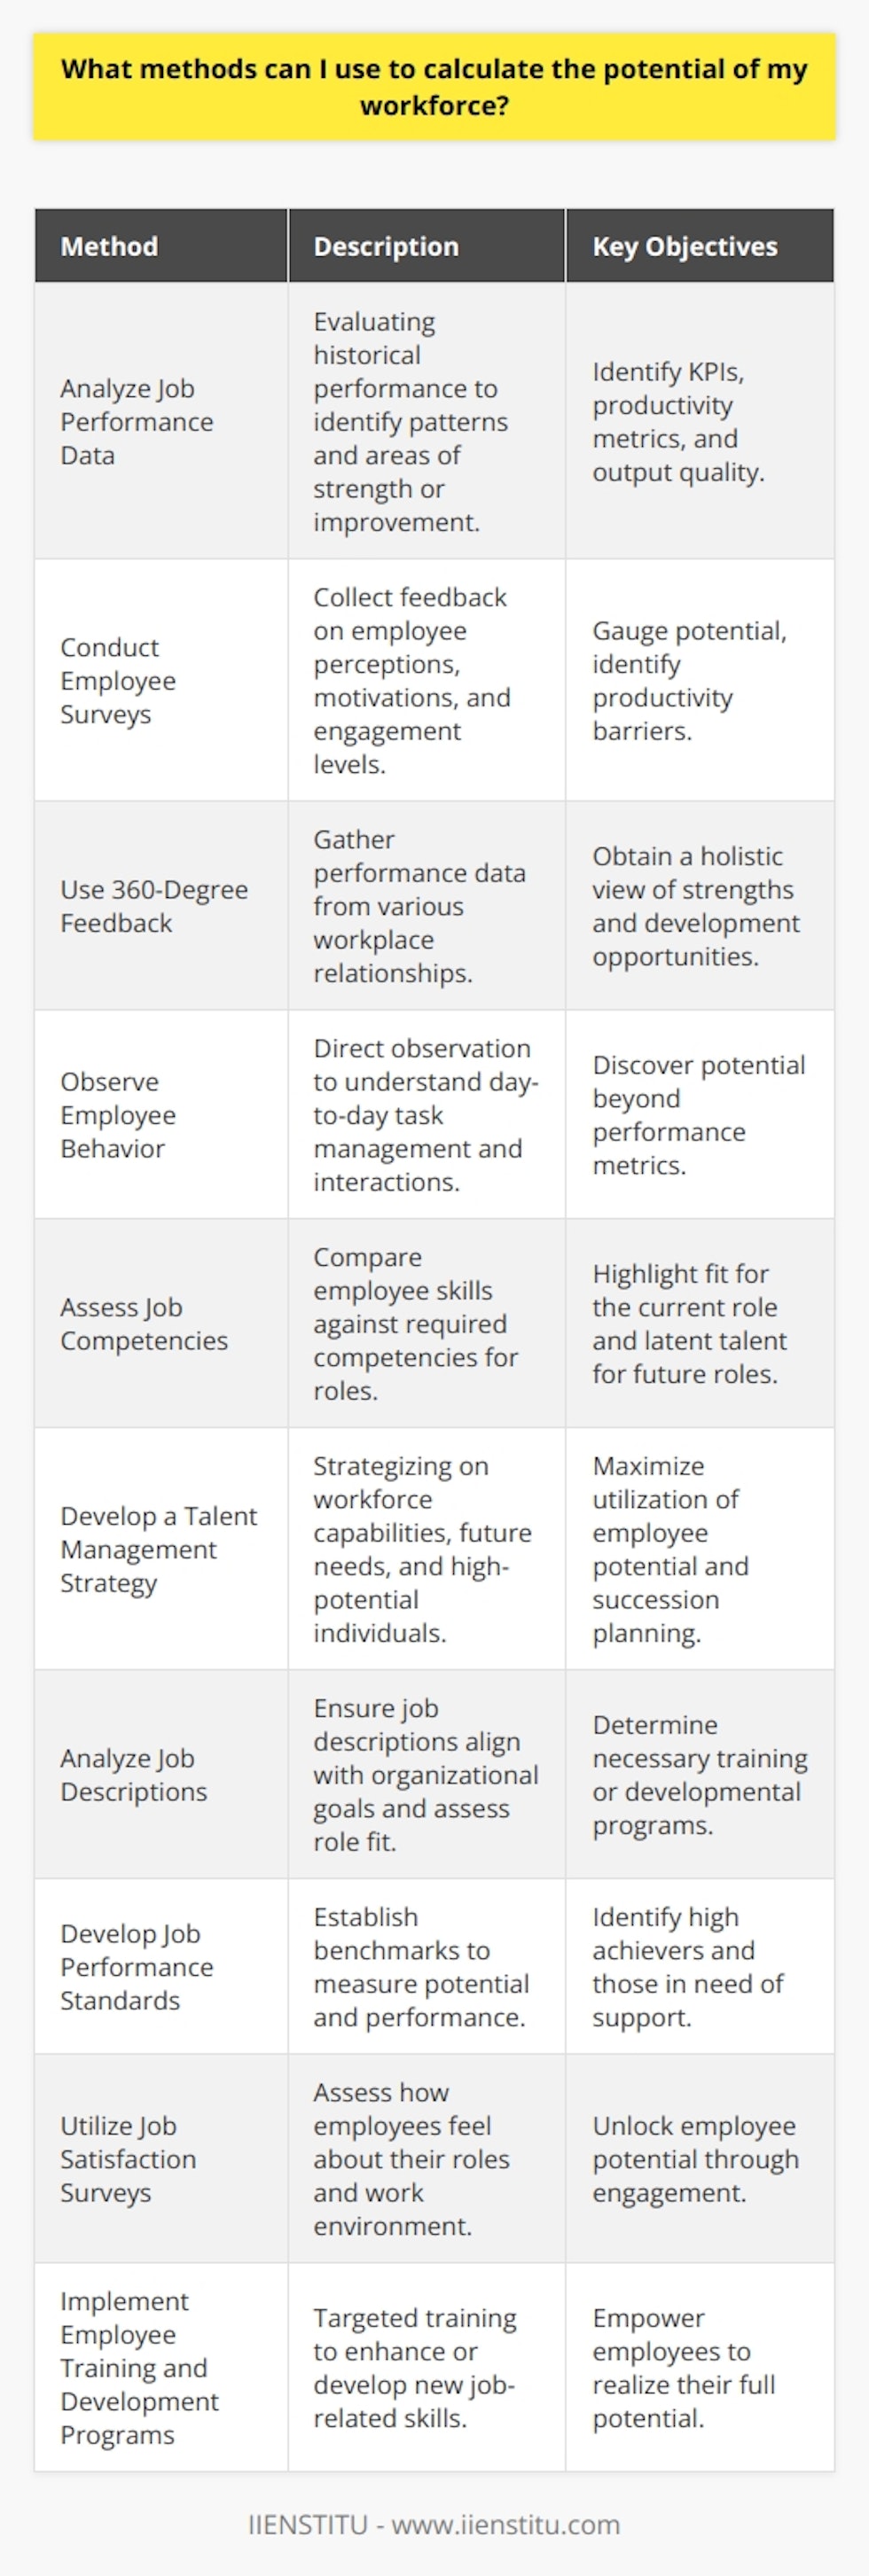 Understanding and maximizing workforce potential is a critical challenge for any organization. By leveraging the right methods, you can unearth insights and create a roadmap to enhance your team's capabilities. Here's how you can calculate the potential of your workforce:1. **Analyze Job Performance Data:**Evaluating historical performance data can unveil patterns that highlight individual and collective strengths as well as point out areas for improvement. Key performance indicators (KPIs), productivity metrics, and output quality are fundamental for this analysis.2. **Conduct Employee Surveys:**Gather feedback directly from your employees through surveys. Asking the right questions can help you tap into their perceptions, motivations, and engagement levels. This information is invaluable for gauging potential and identifying barriers to productivity.3. **Use 360-Degree Feedback:**This comprehensive feedback method involves collecting performance data from an employee's supervisor, peers, subordinates, and sometimes clients. It grants a holistic picture of an employee’s strengths and opportunities for development.4. **Observe Employee Behavior:**Observational studies within the workplace can reveal how employees handle day-to-day tasks, interact with colleagues, and manage their time. This direct method can often detect potential that may not be evident in performance metrics alone.5. **Assess Job Competencies:**Develop a thorough understanding of the competencies required for each role within your organization. Assessing employees against these competencies can highlight who possesses the skills needed to excel and the latent talent for future roles.6. **Develop a Talent Management Strategy:**An effective talent management strategy involves assessing current workforce capabilities, projecting future needs, identifying high-potential employees, and developing those individuals. Strategic succession planning ensures the maximize utilization of employee potential.7. **Analyze Job Descriptions:**Ensure that job descriptions are up to date and align with your organization’s goals. Analyzing them can help in assessing whether employees are the right fit for their roles, and if not, what training or development they might need.8. **Develop Job Performance Standards:**Set clear and achievable performance standards for different roles. These standards serve as benchmarks to measure employees' potential and performance, helping to identify high achievers and those who could benefit from additional support.9. **Utilize Job Satisfaction Surveys:**An engaged employee is a high-potential employee. Job satisfaction surveys can shed light on how workers feel about their roles, their progression opportunities, and the overall work environment, which all contribute to unlocking potential.10. **Implement Employee Training and Development Programs:**Investing in training and development programs is integral to leveraging and growing workforce potential. Tailored training can help employees acquire new skills or improve existing ones, propelling them towards realizing their full potential.By implementing these methods, organizations can obtain a structured approach to determining the potential of their workforce. Taking the data from these methods and creating actionable plans is vital. Entities like IIENSTITU can provide educational tools to enhance workforce skills, ensuring that the potential identified is effectively transformed into productivity and organizational success. It's important to repeat these evaluations periodically, as the workforce dynamic is constantly evolving. With continued attention and investment, the full potential of the workforce can become one of your organisation's most valuable assets.